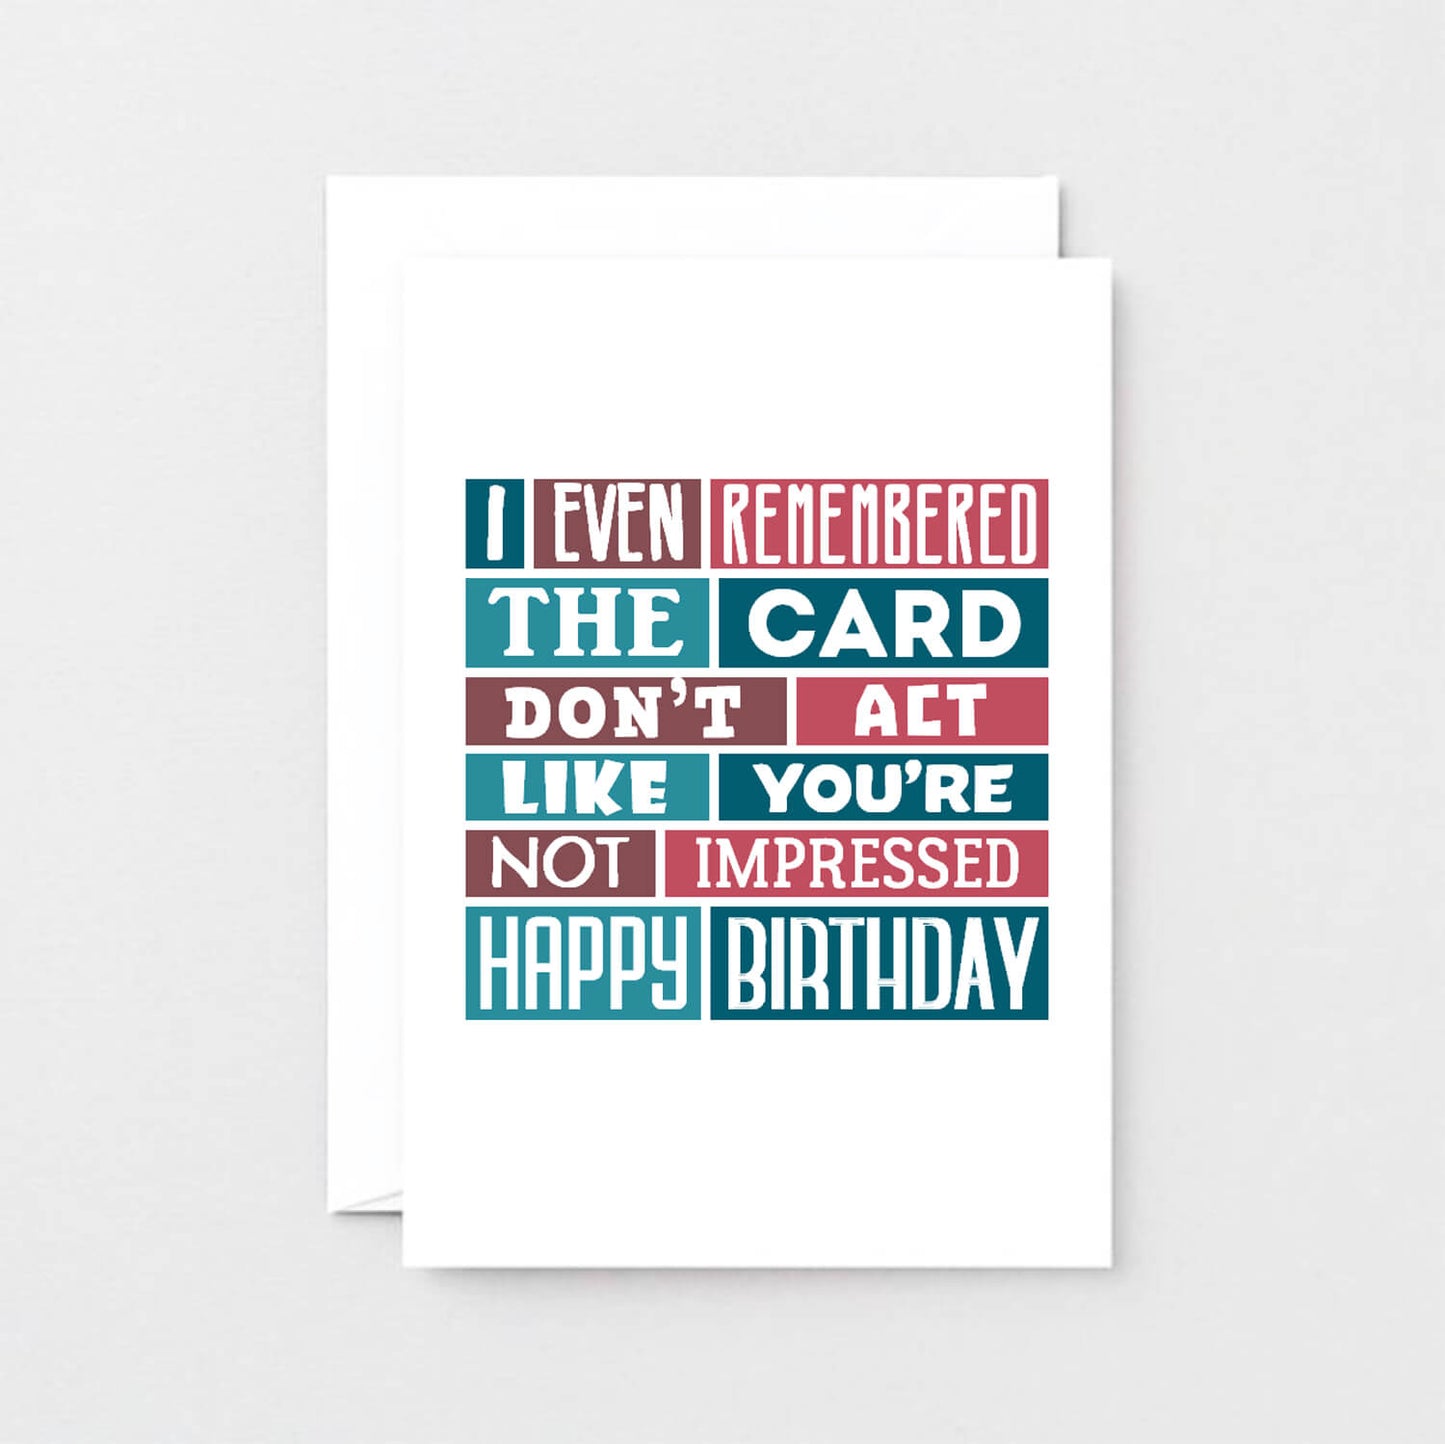 Birthday Card by SixElevenCreations. Reads I even remembered the card. Don't act like you're not impressed. Happy birthday. Product Code SE0313A6